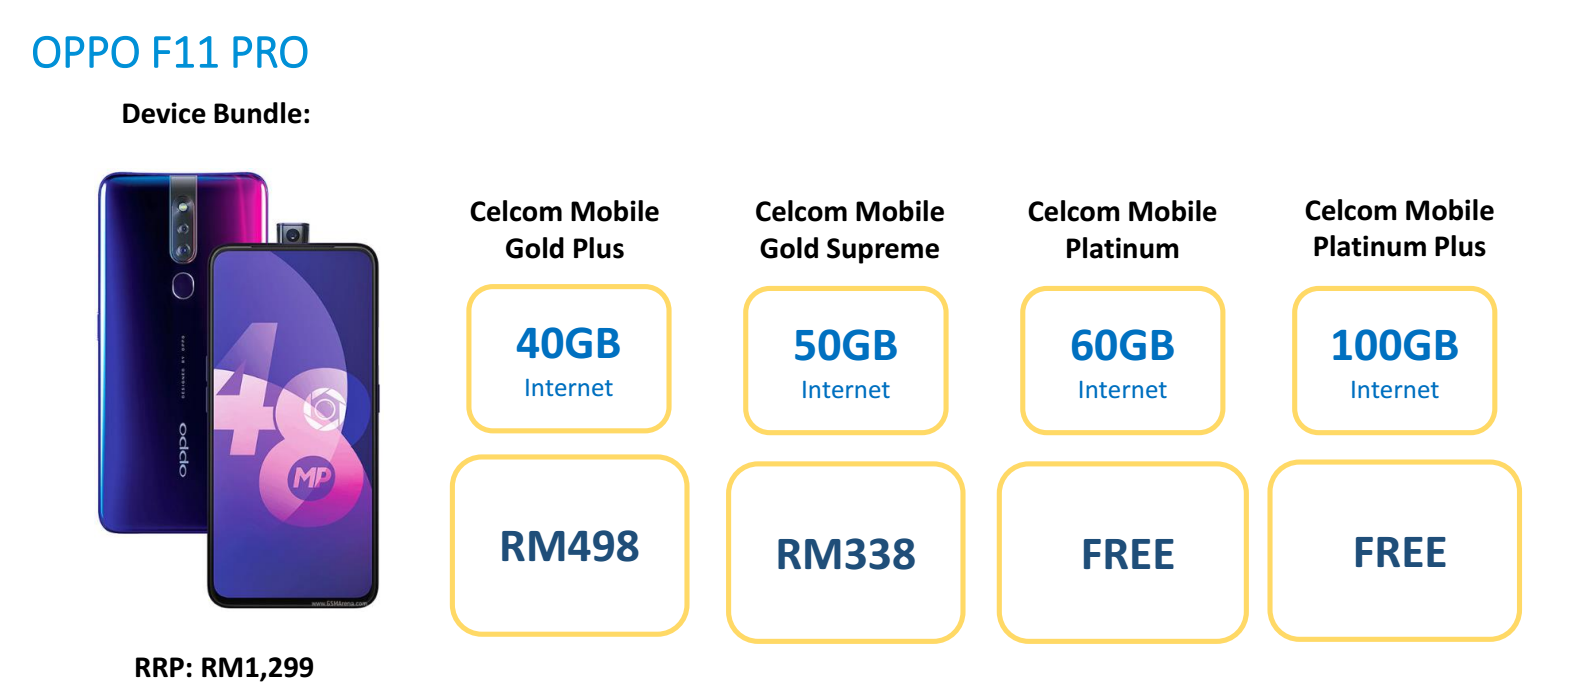 Get OPPO F11 Pro for FREE with Celcom Postpaid Plan